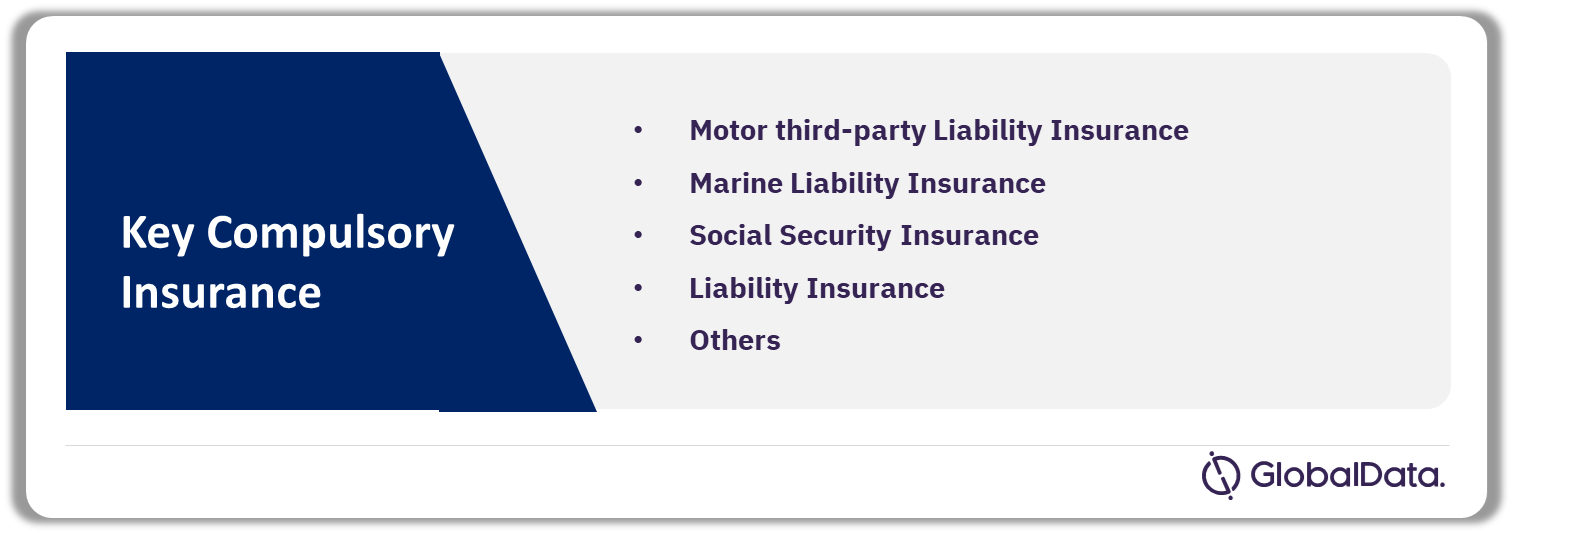 Japan Insurance Industry Analysis by Compulsory Insurances